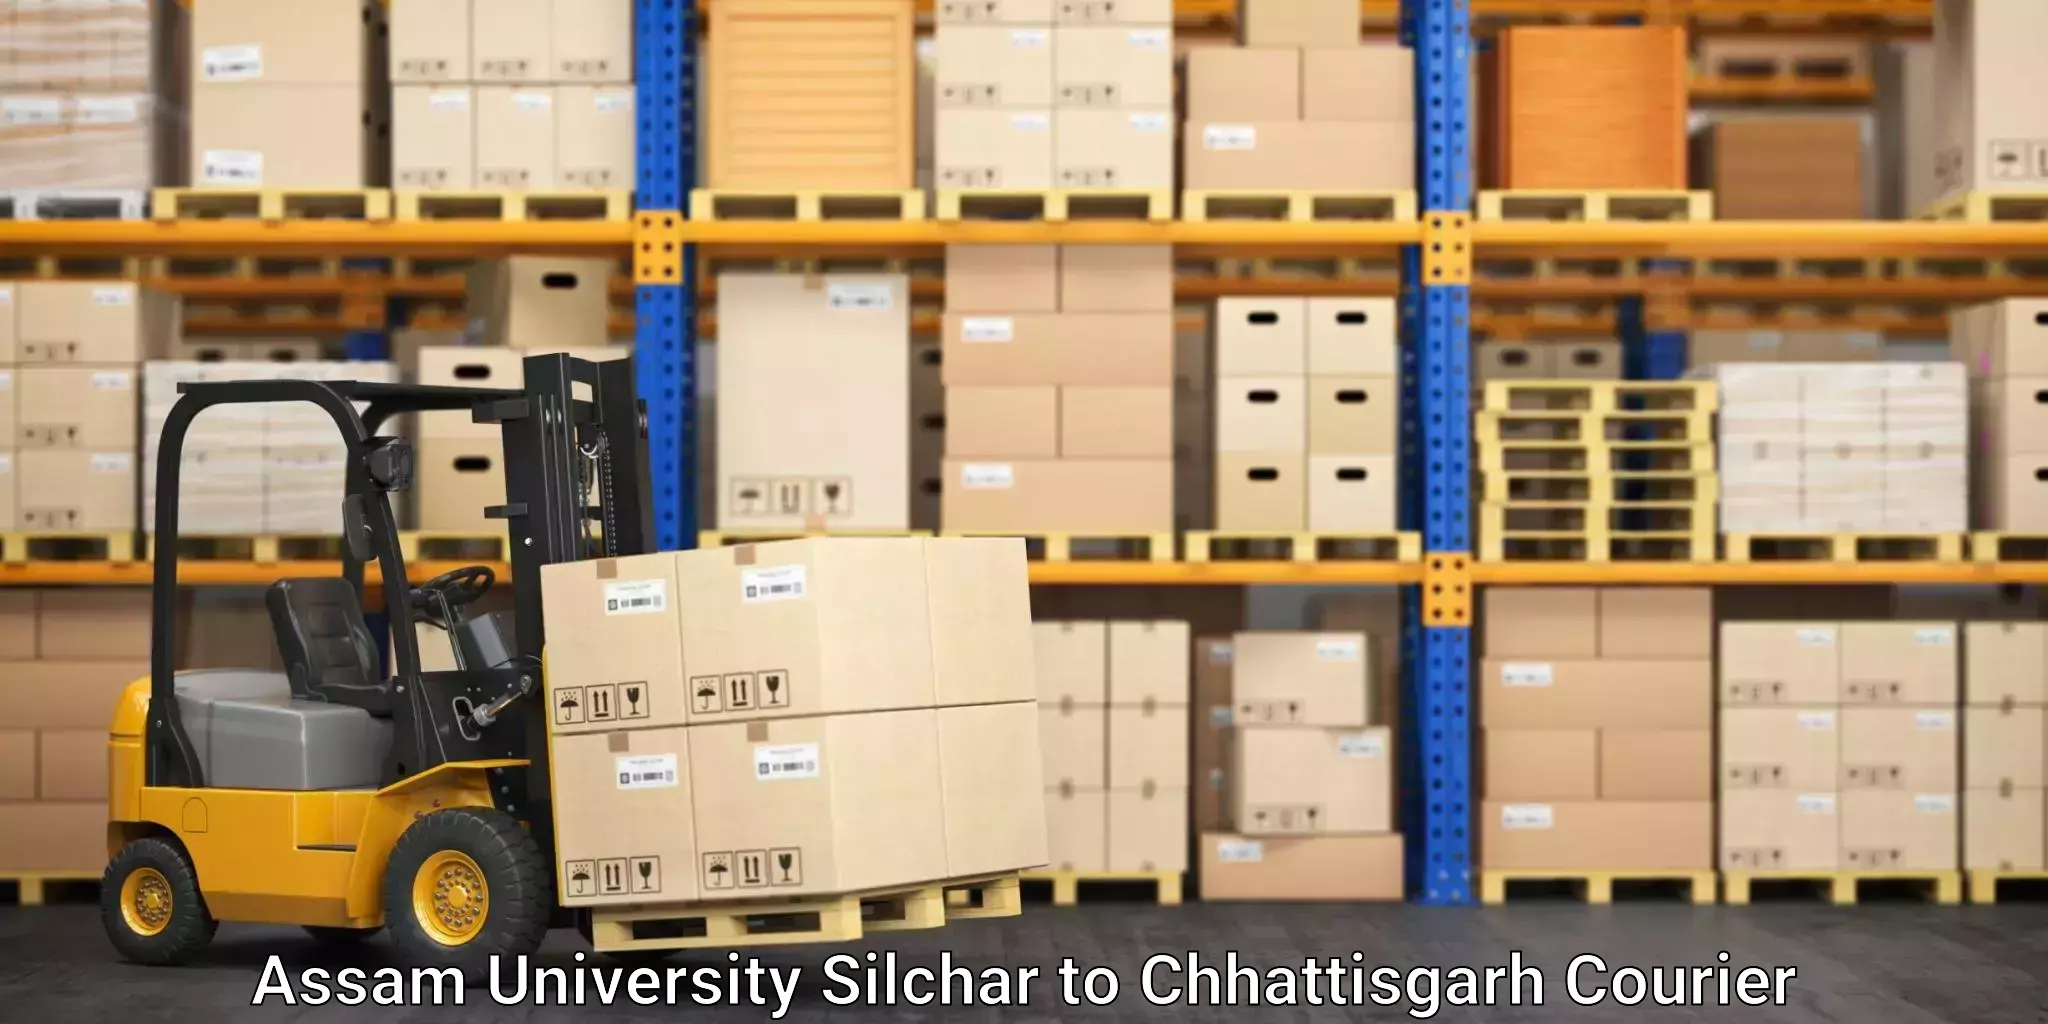 Global shipping networks Assam University Silchar to Ambikapur